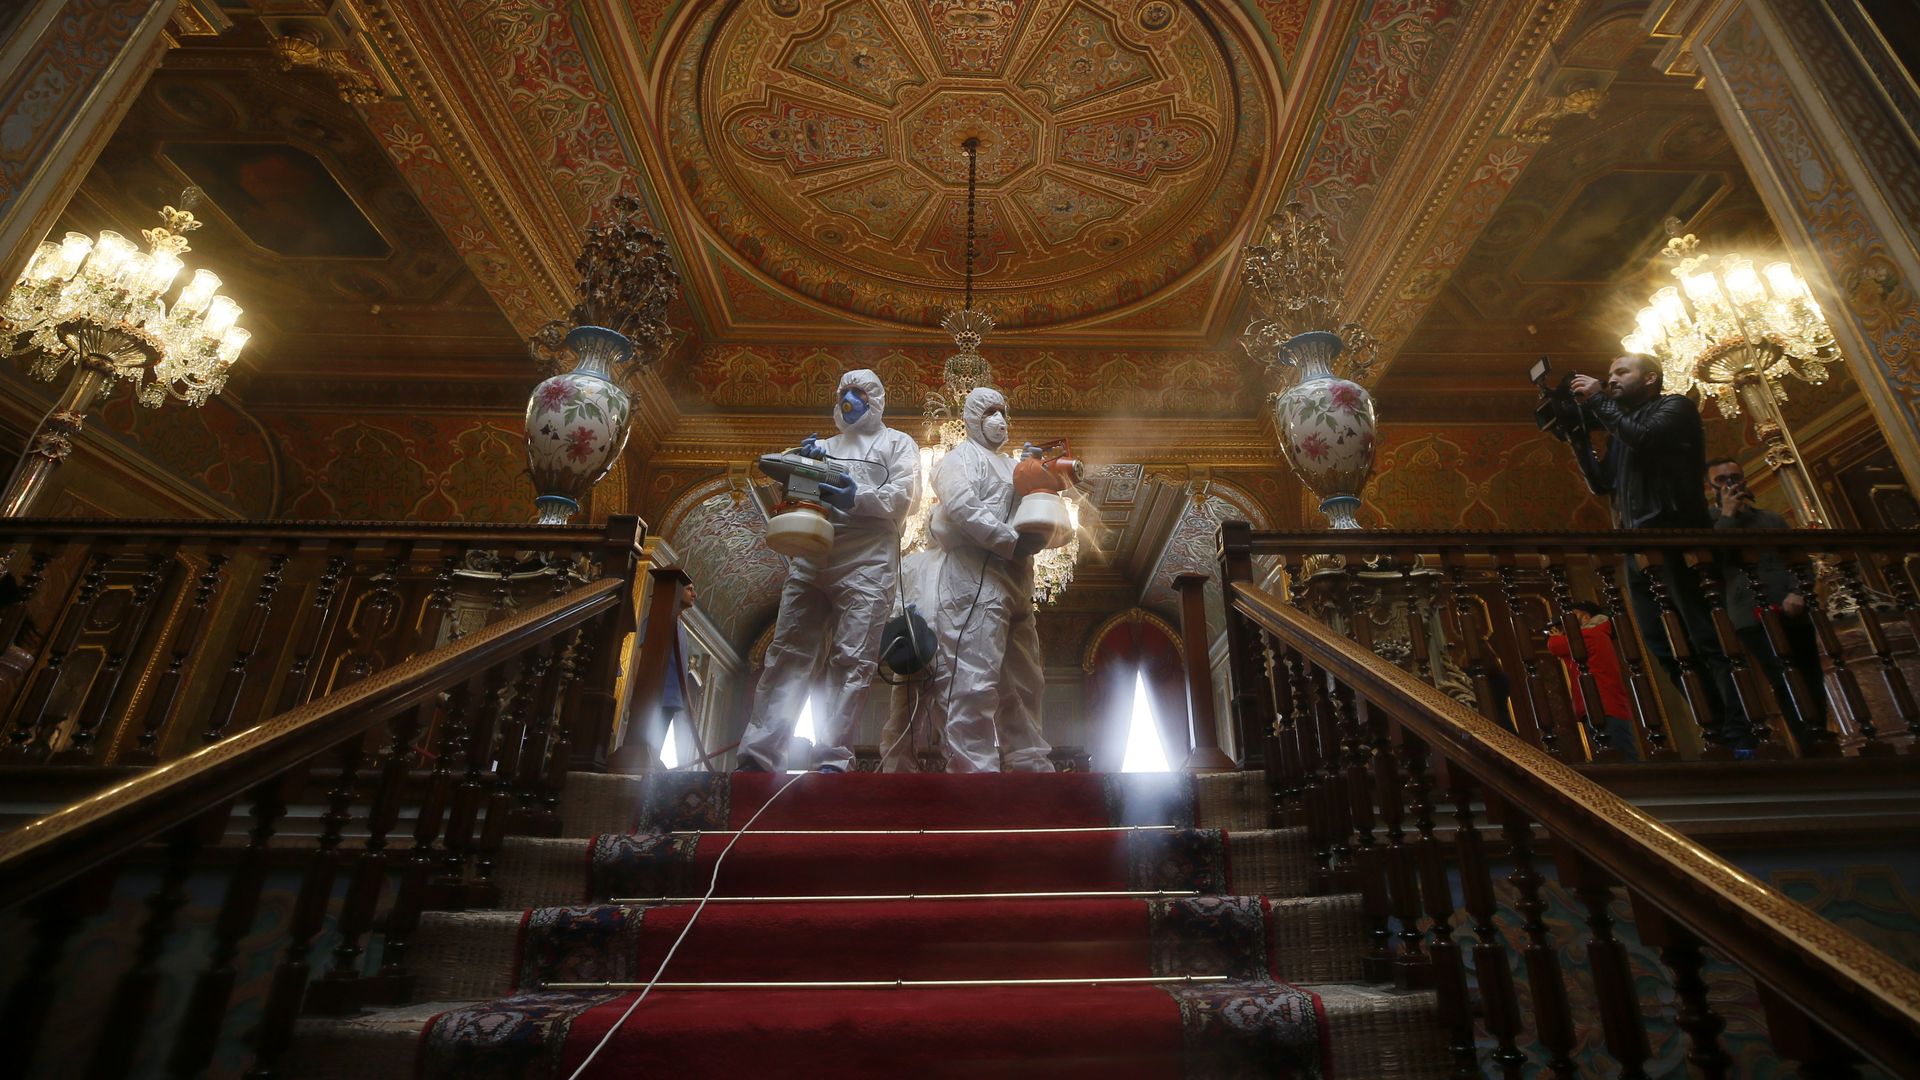 Men in suits disinfecting stairs